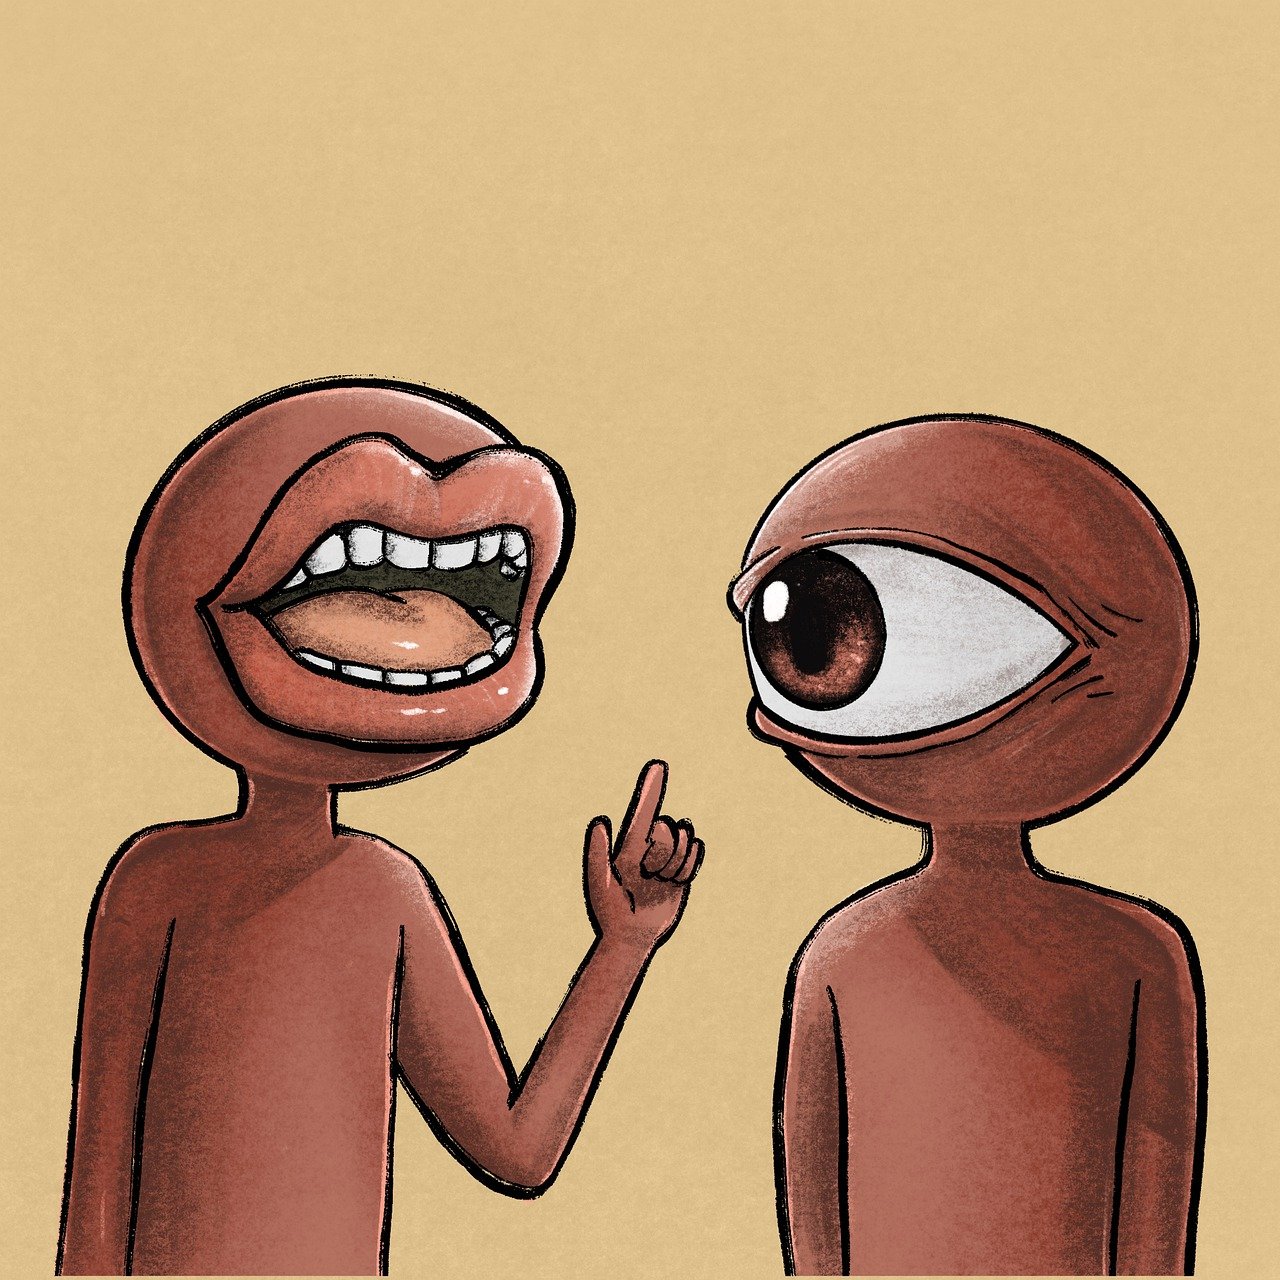 a drawing of two people talking to each other, an illustration of, inspired by Victor Brauner, tumblr, conceptual art, alien mouth, cartoon style illustration, uganda knuckles, high detail illustration